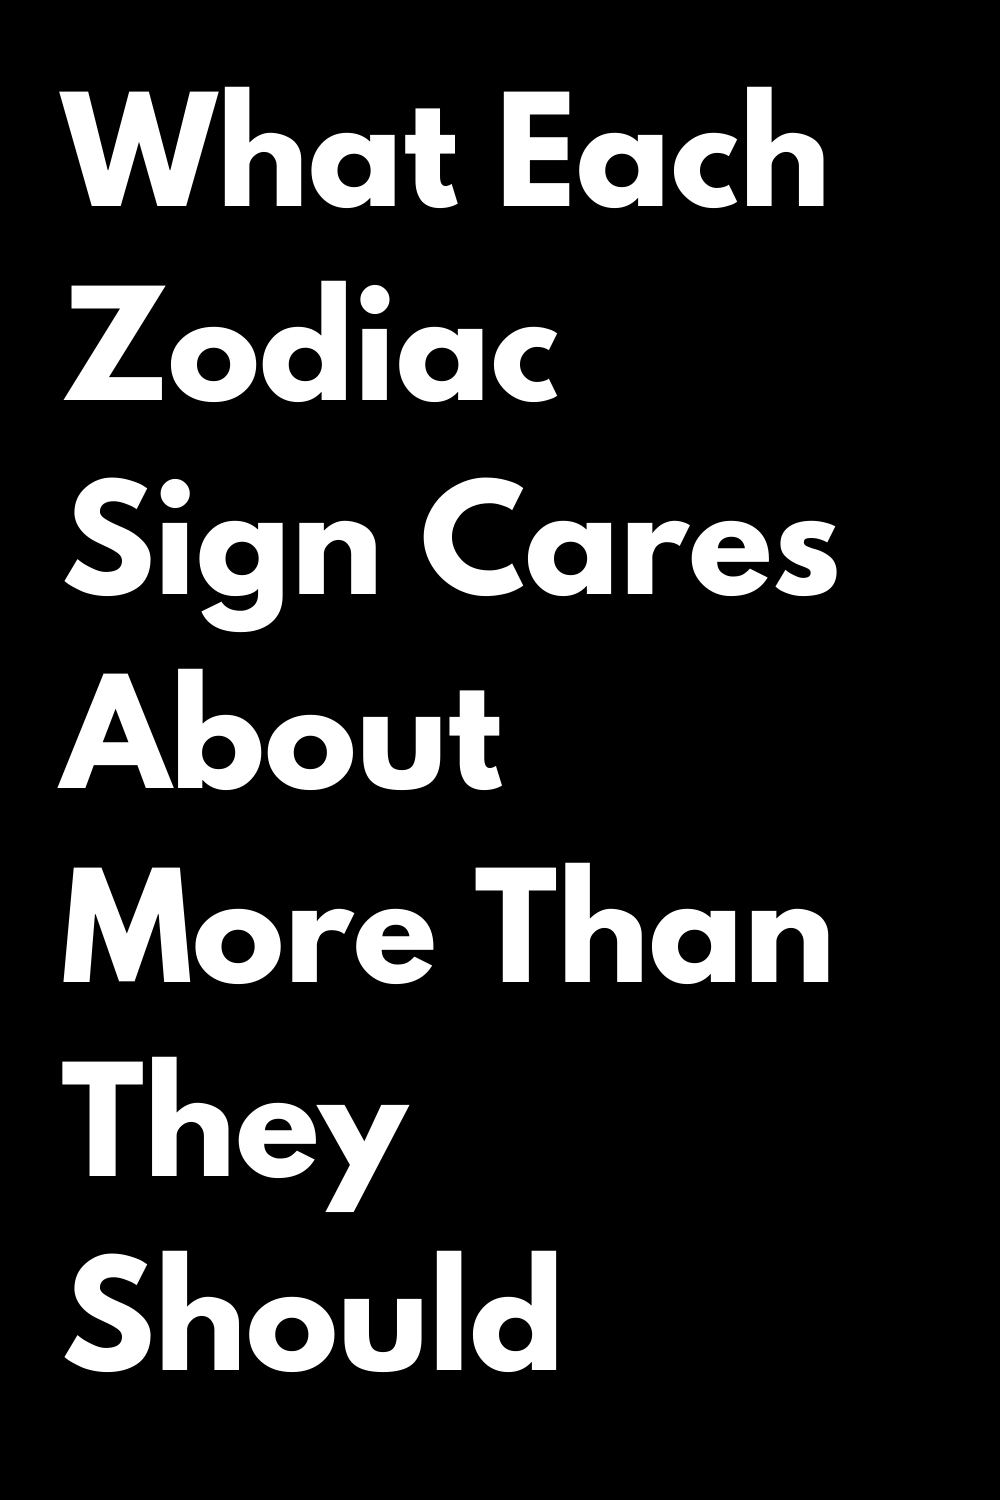 What Each Zodiac Sign Cares About More Than They Should